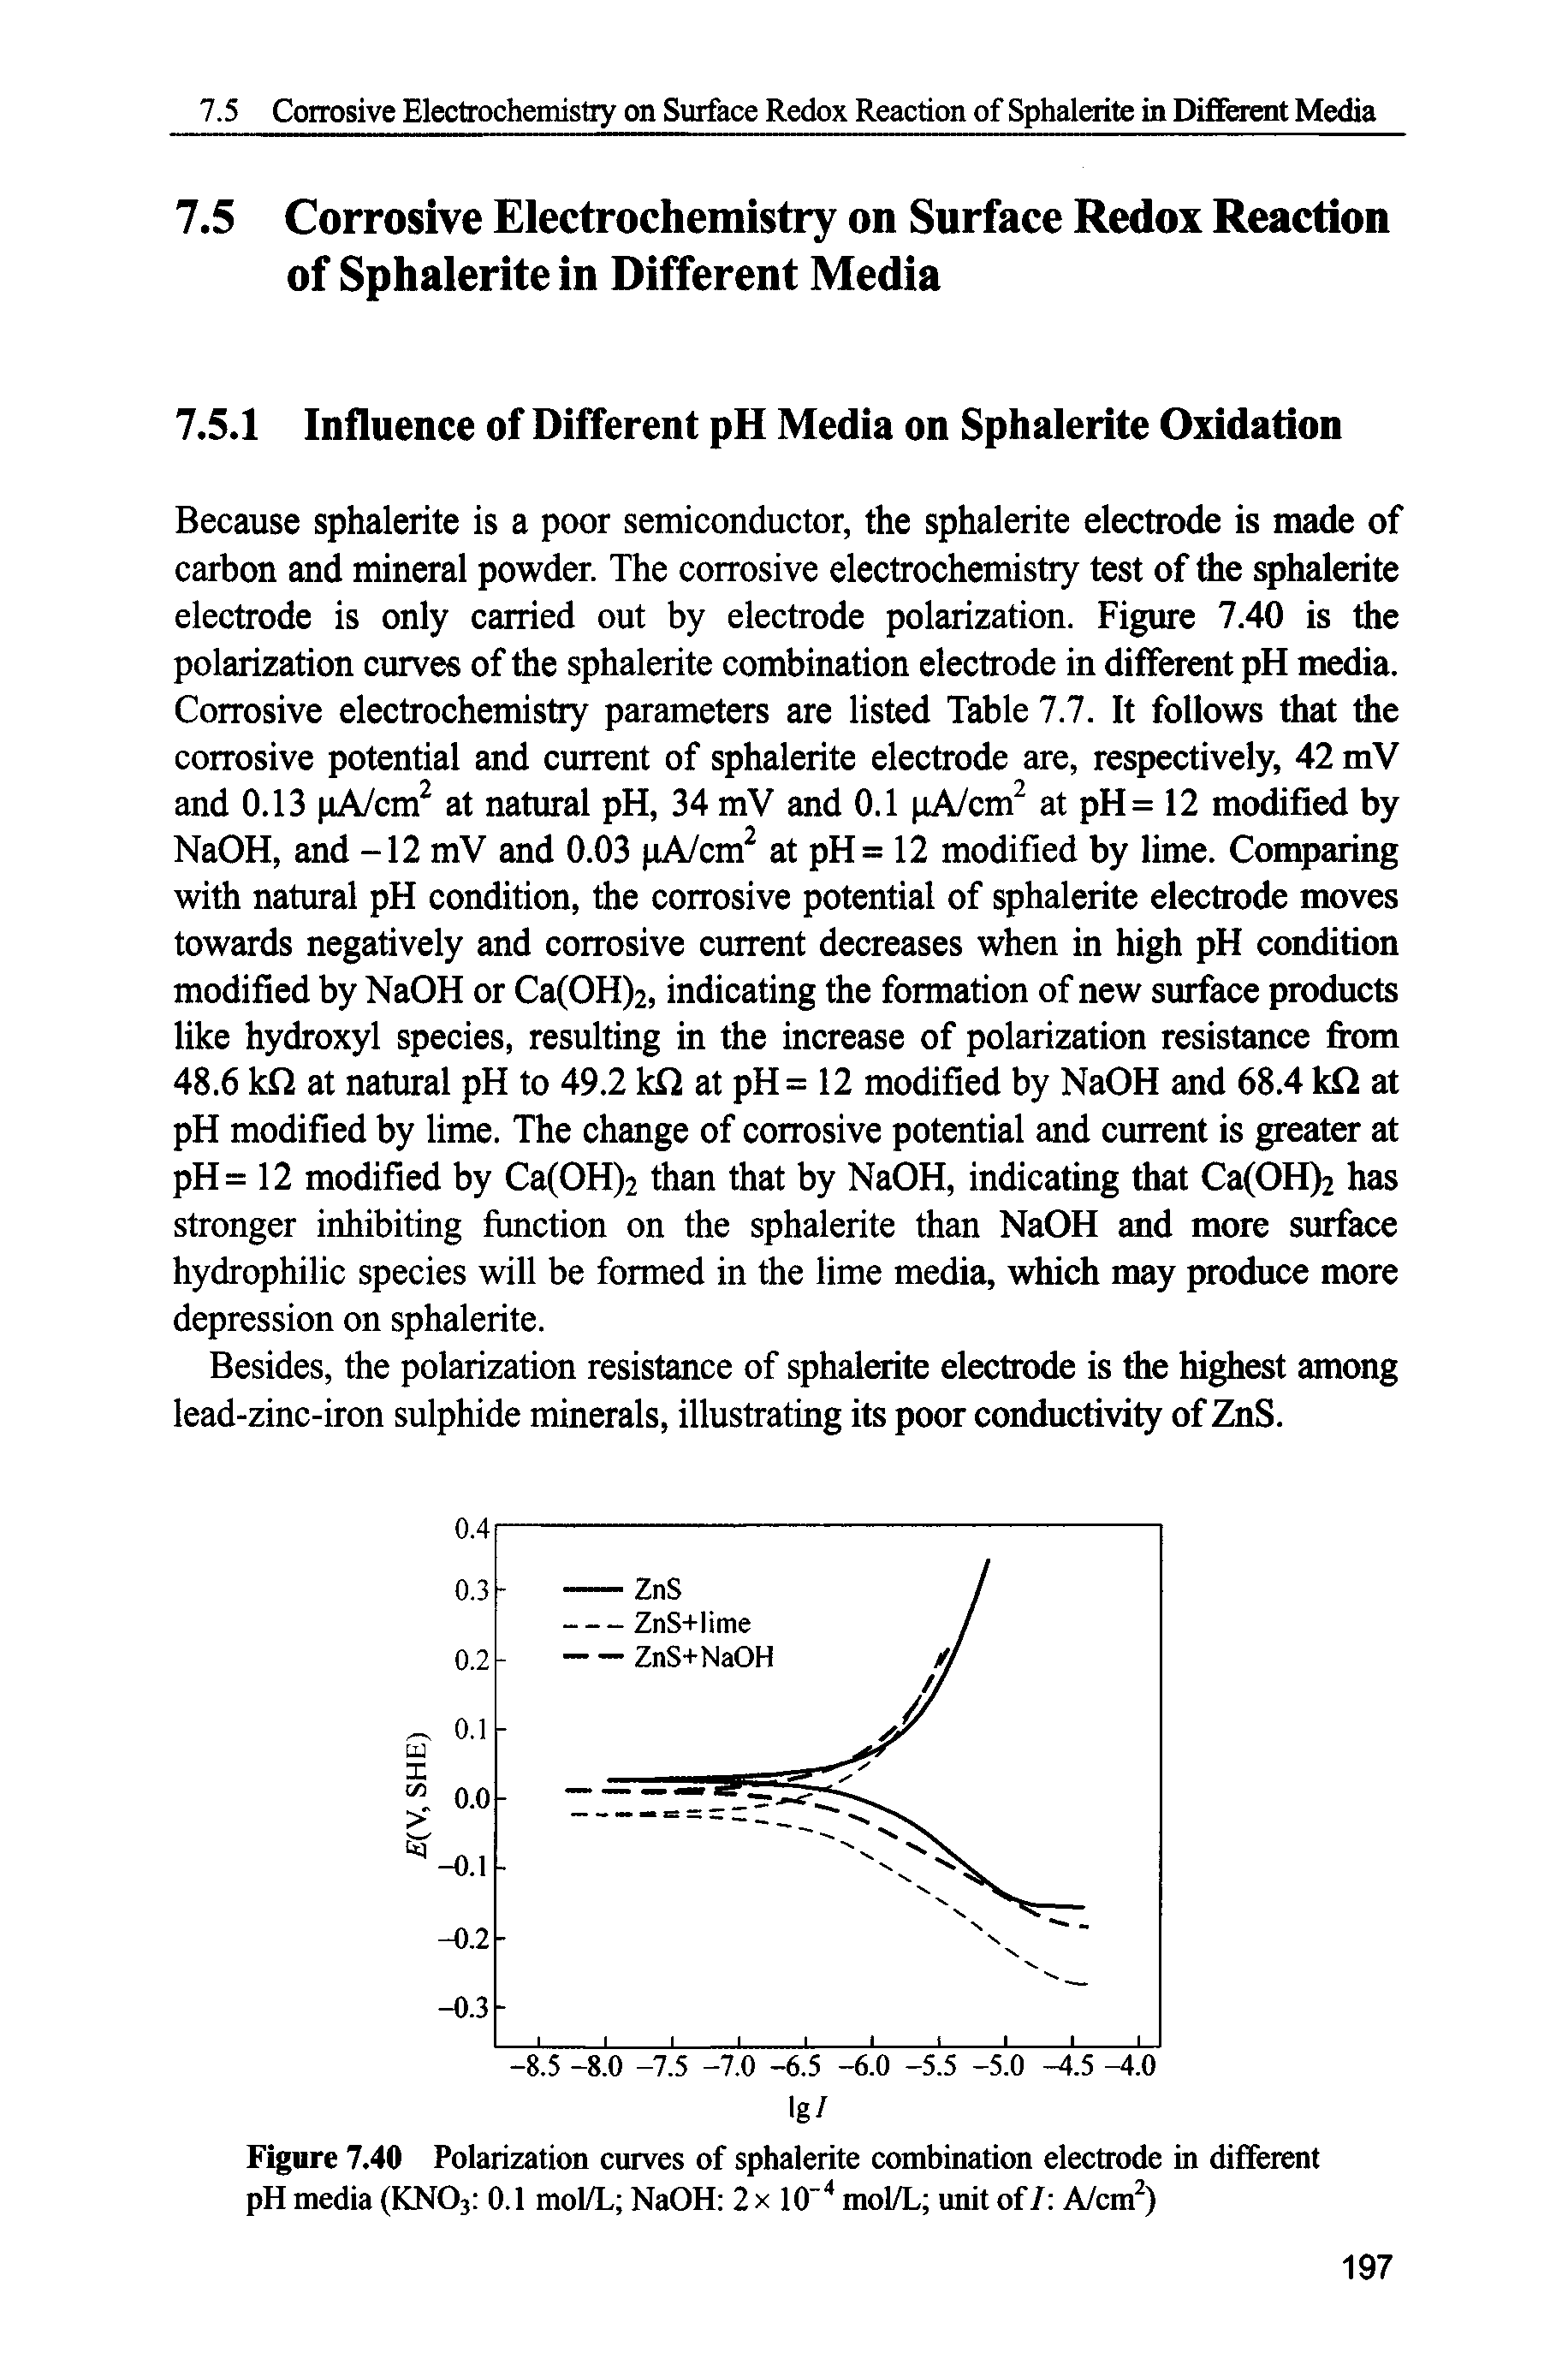 Figure 7.40 Polarization curves of sphalerite combination electrode in different pH media (KNO3 0.1 mol/L NaOH 2 x 10" mol/L unit of I A/cm )...